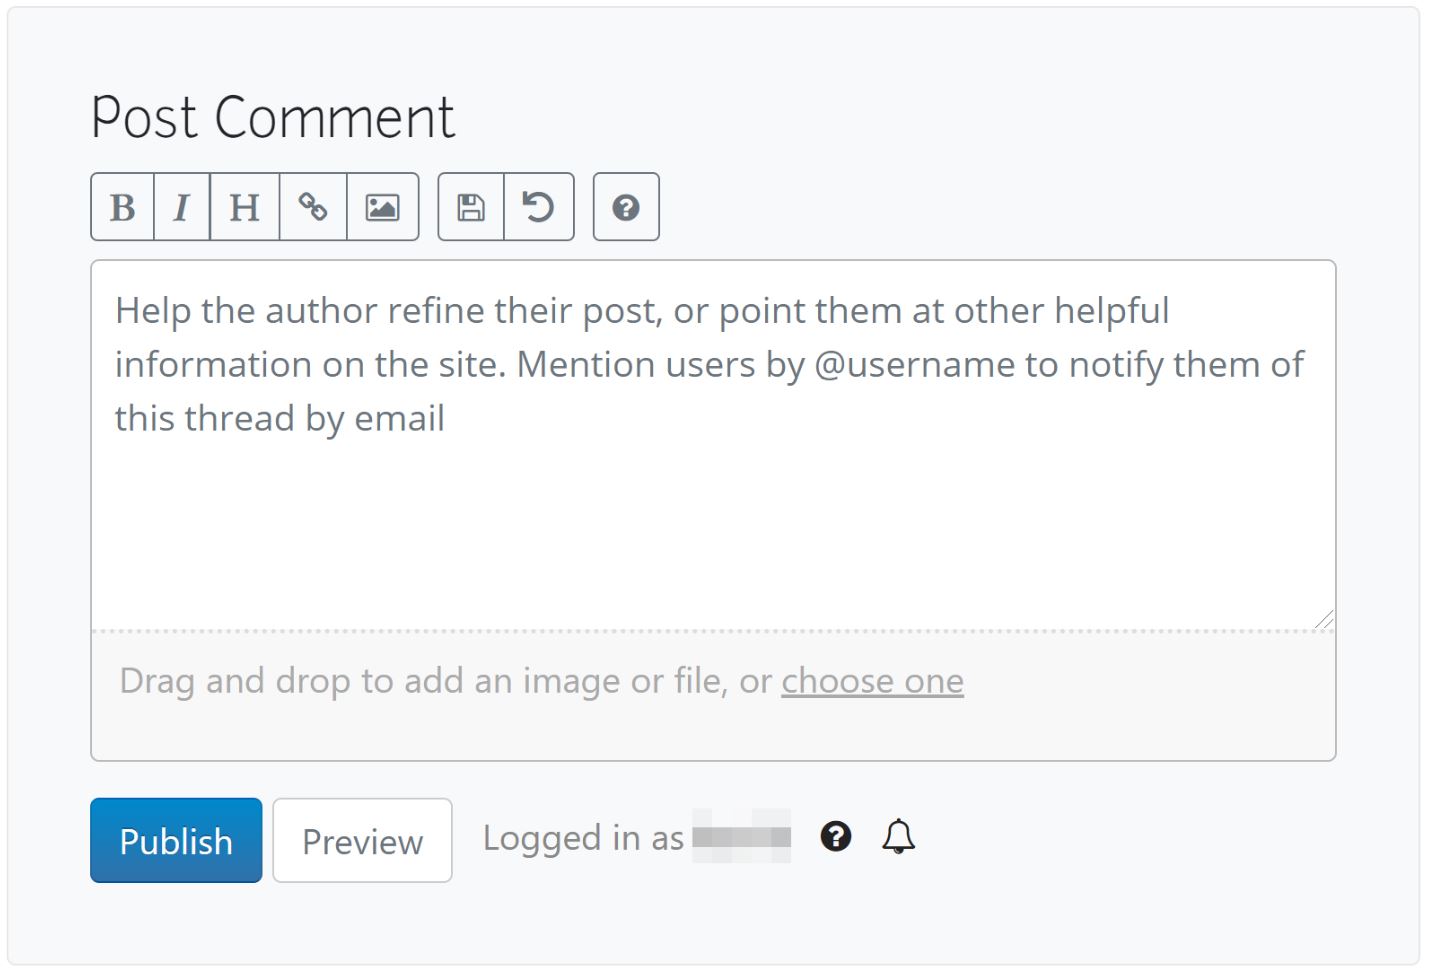 A screenshot of a textbox titled 'post comment', including a default text with the following instructions: 'Help the author refine their post, or point them at other helpful information on the site. Mention users @username to notify them of this thread by email'